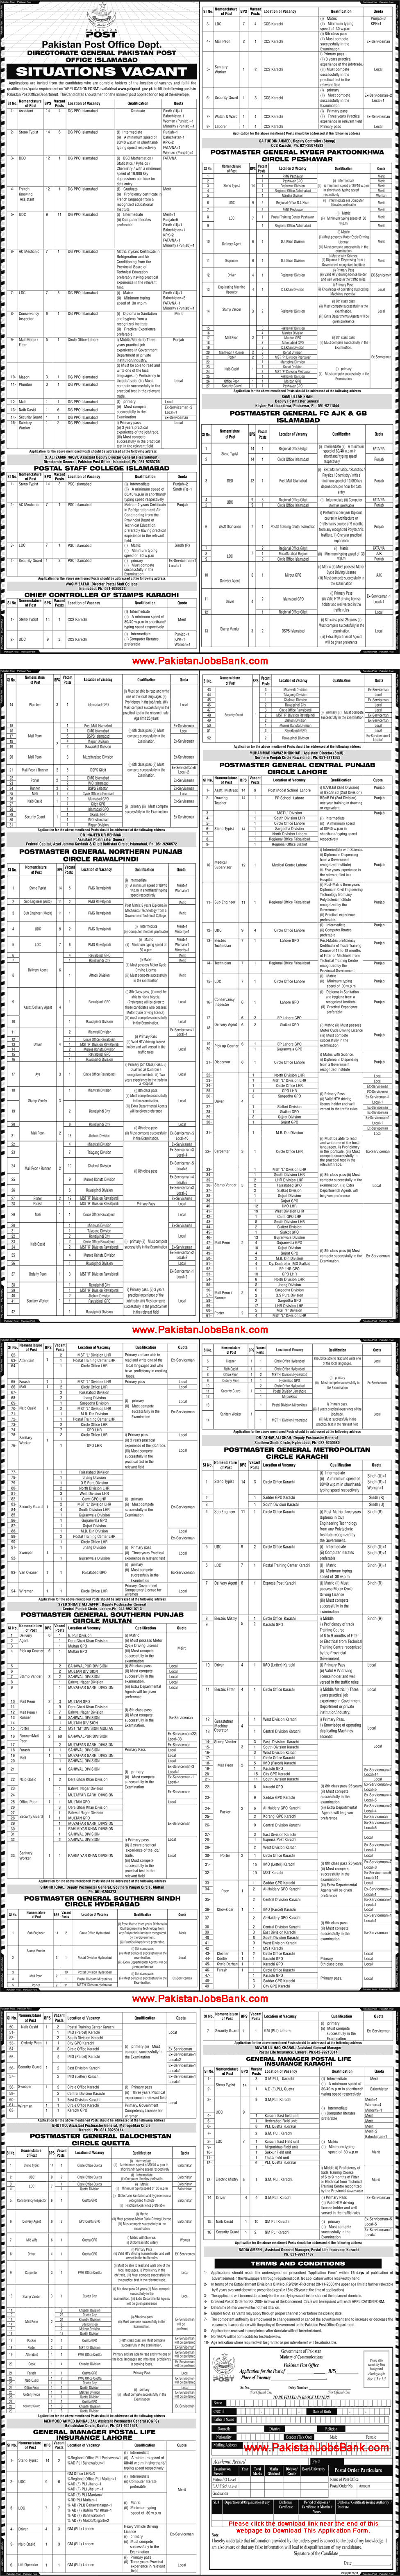 Pakistan Post Office Jobs 2015 Application Form Download Latest / New